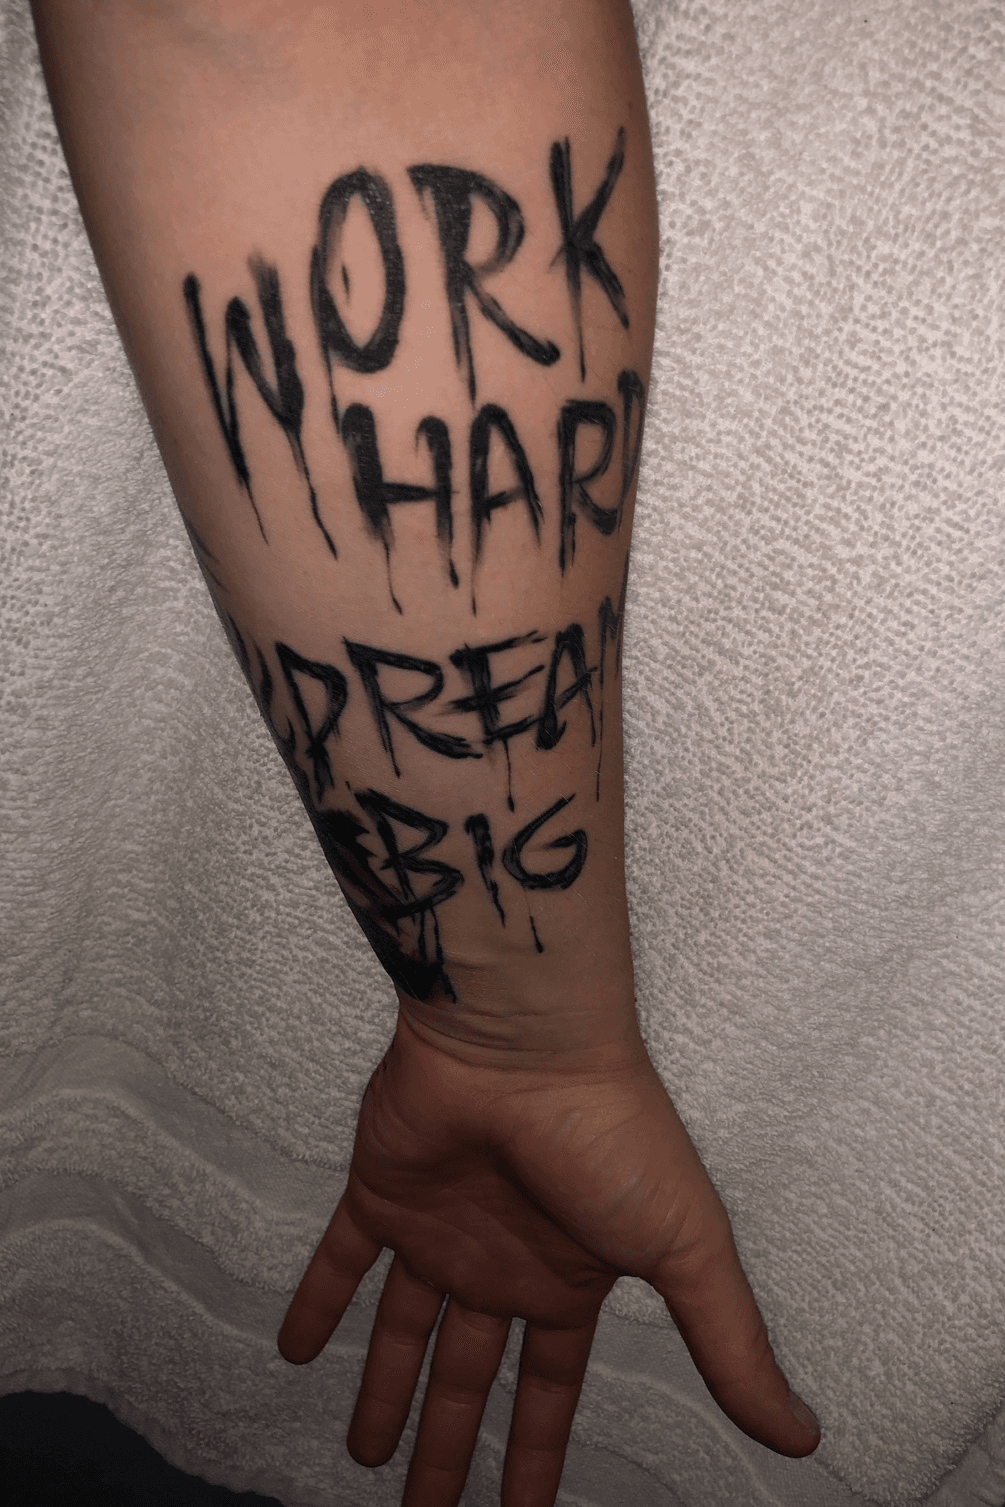 Share more than 147 work harder tattoo best